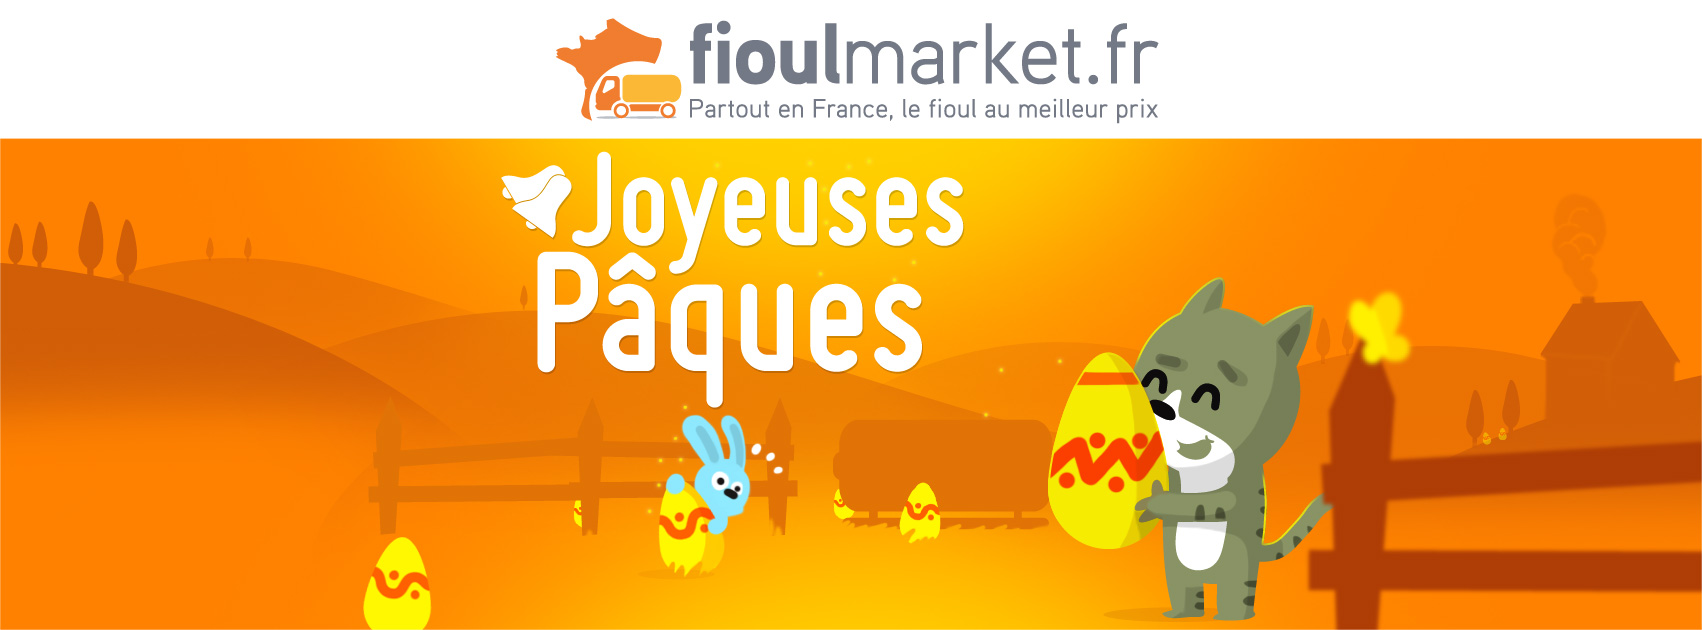 paques fioulmarket